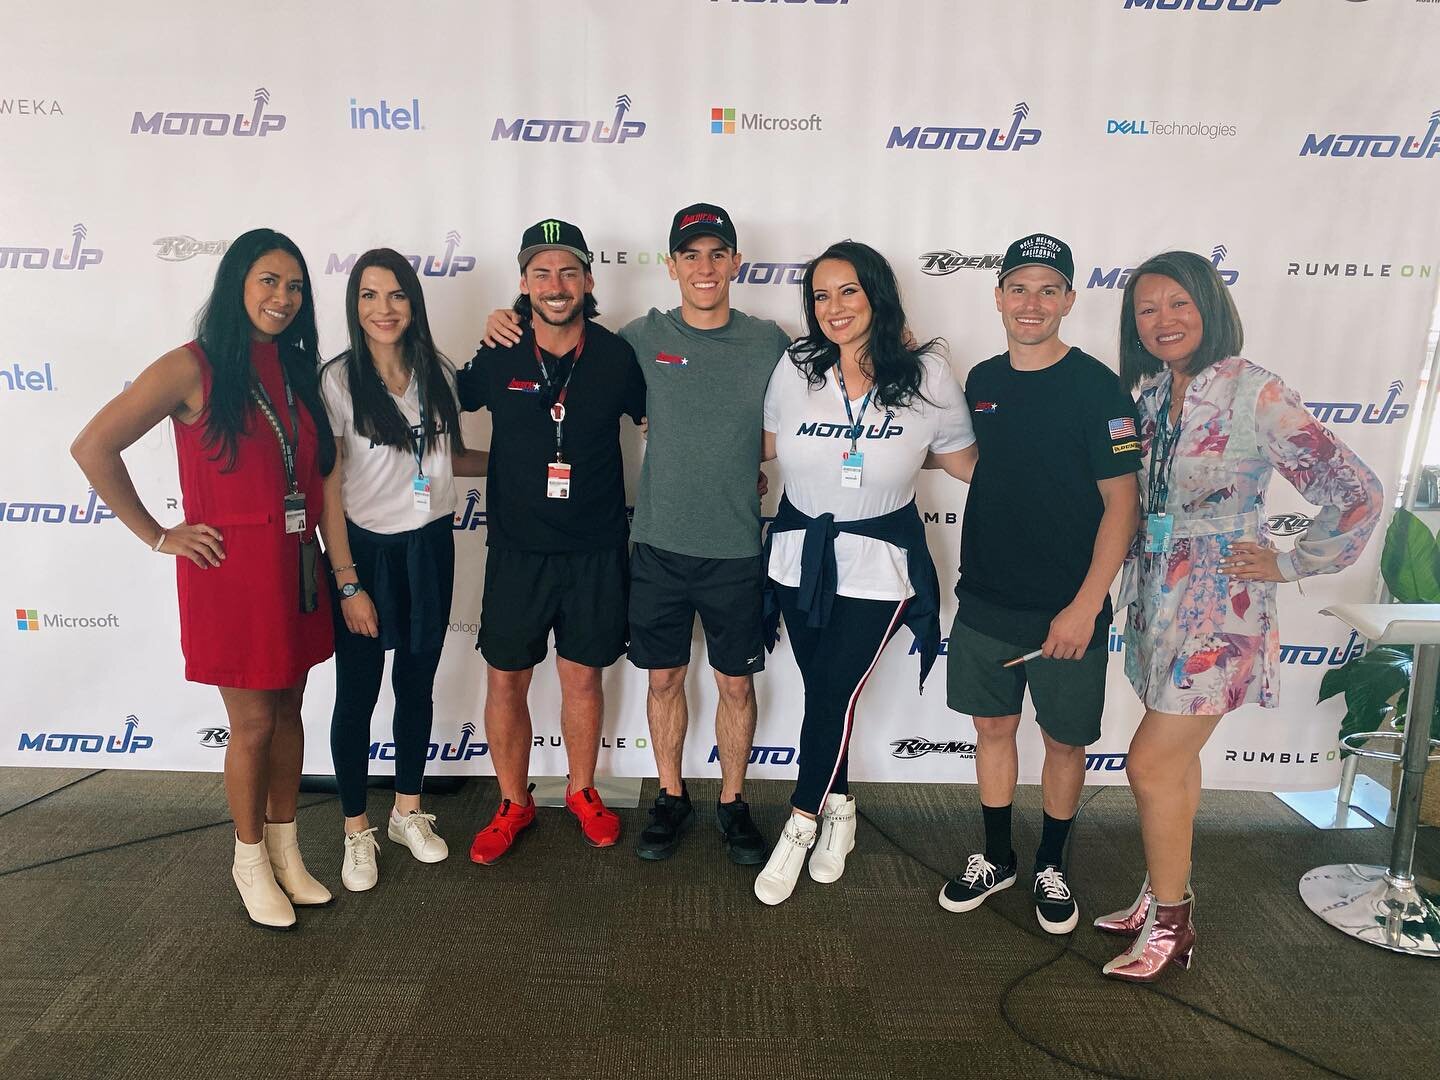 What an amazing day 1 of #americasgp 🇺🇸 Fantastic panel discussion w/ @american_racing_team 🇺🇸 Thank you @21jhopper @cameronbeaubier @seandylankelly 🇺🇸 We had our 2022 beneficiary President, Krystal Hess of @motorcyclemissions in the house 🙌🏽